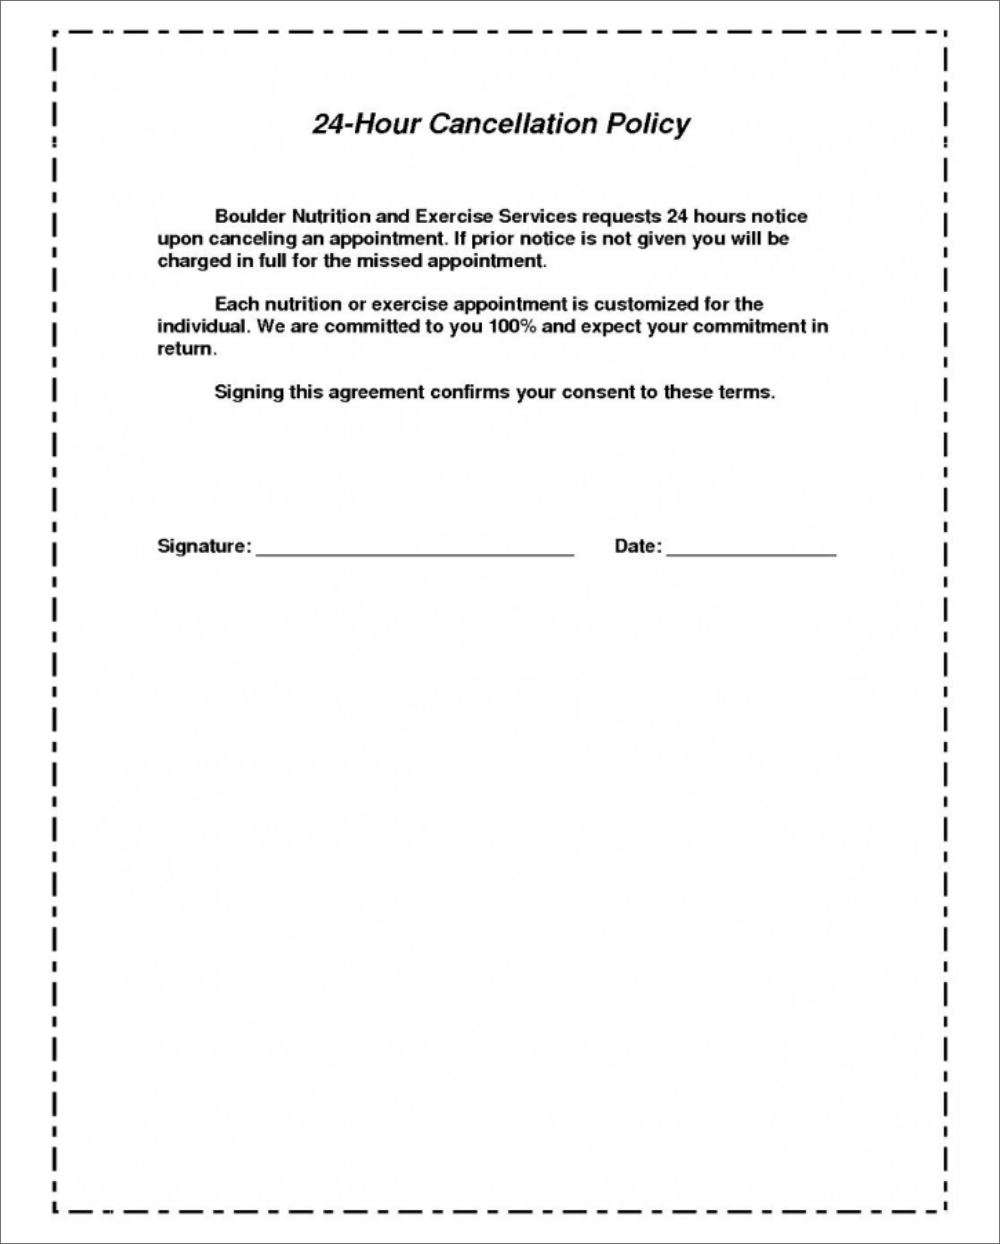 Cancellation policy template